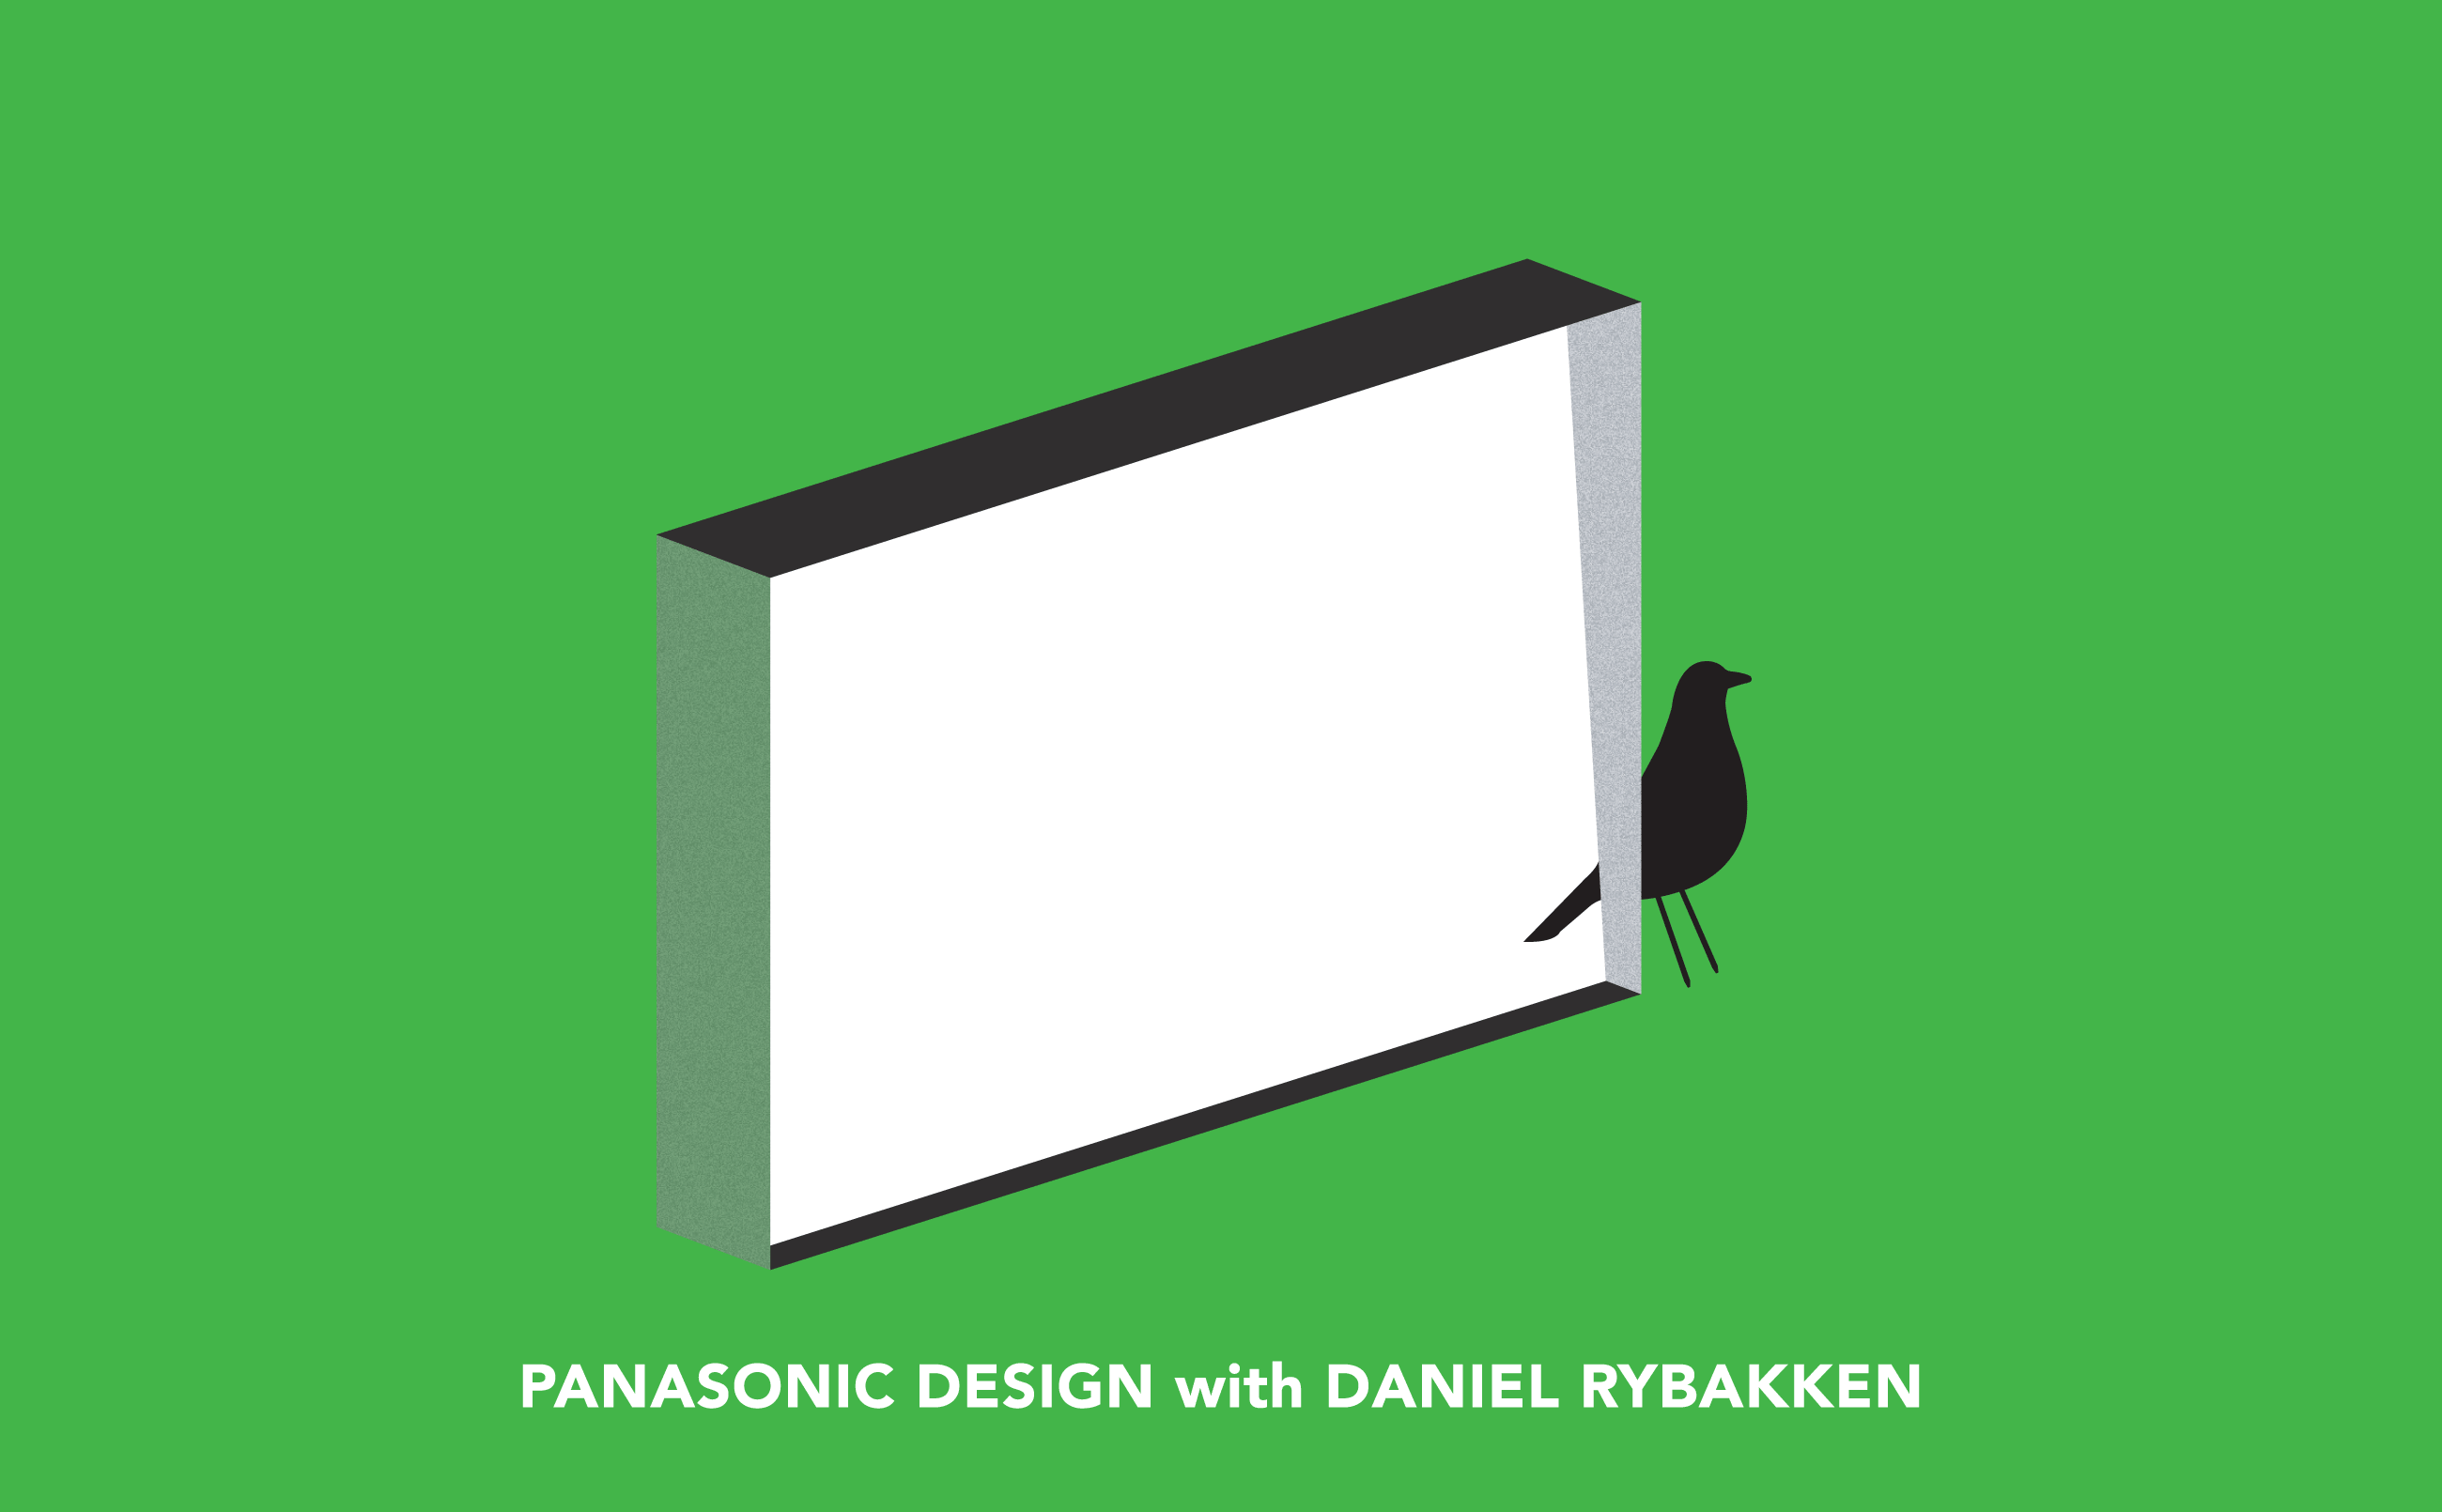 Panasnic design with Daniel Rybakken performs a reference display at Milano Salone 2019. Visit us at Vitra's stand, booth B07/C12, Hall 20 at Fiera Milano Rho from 9 to 14 April.